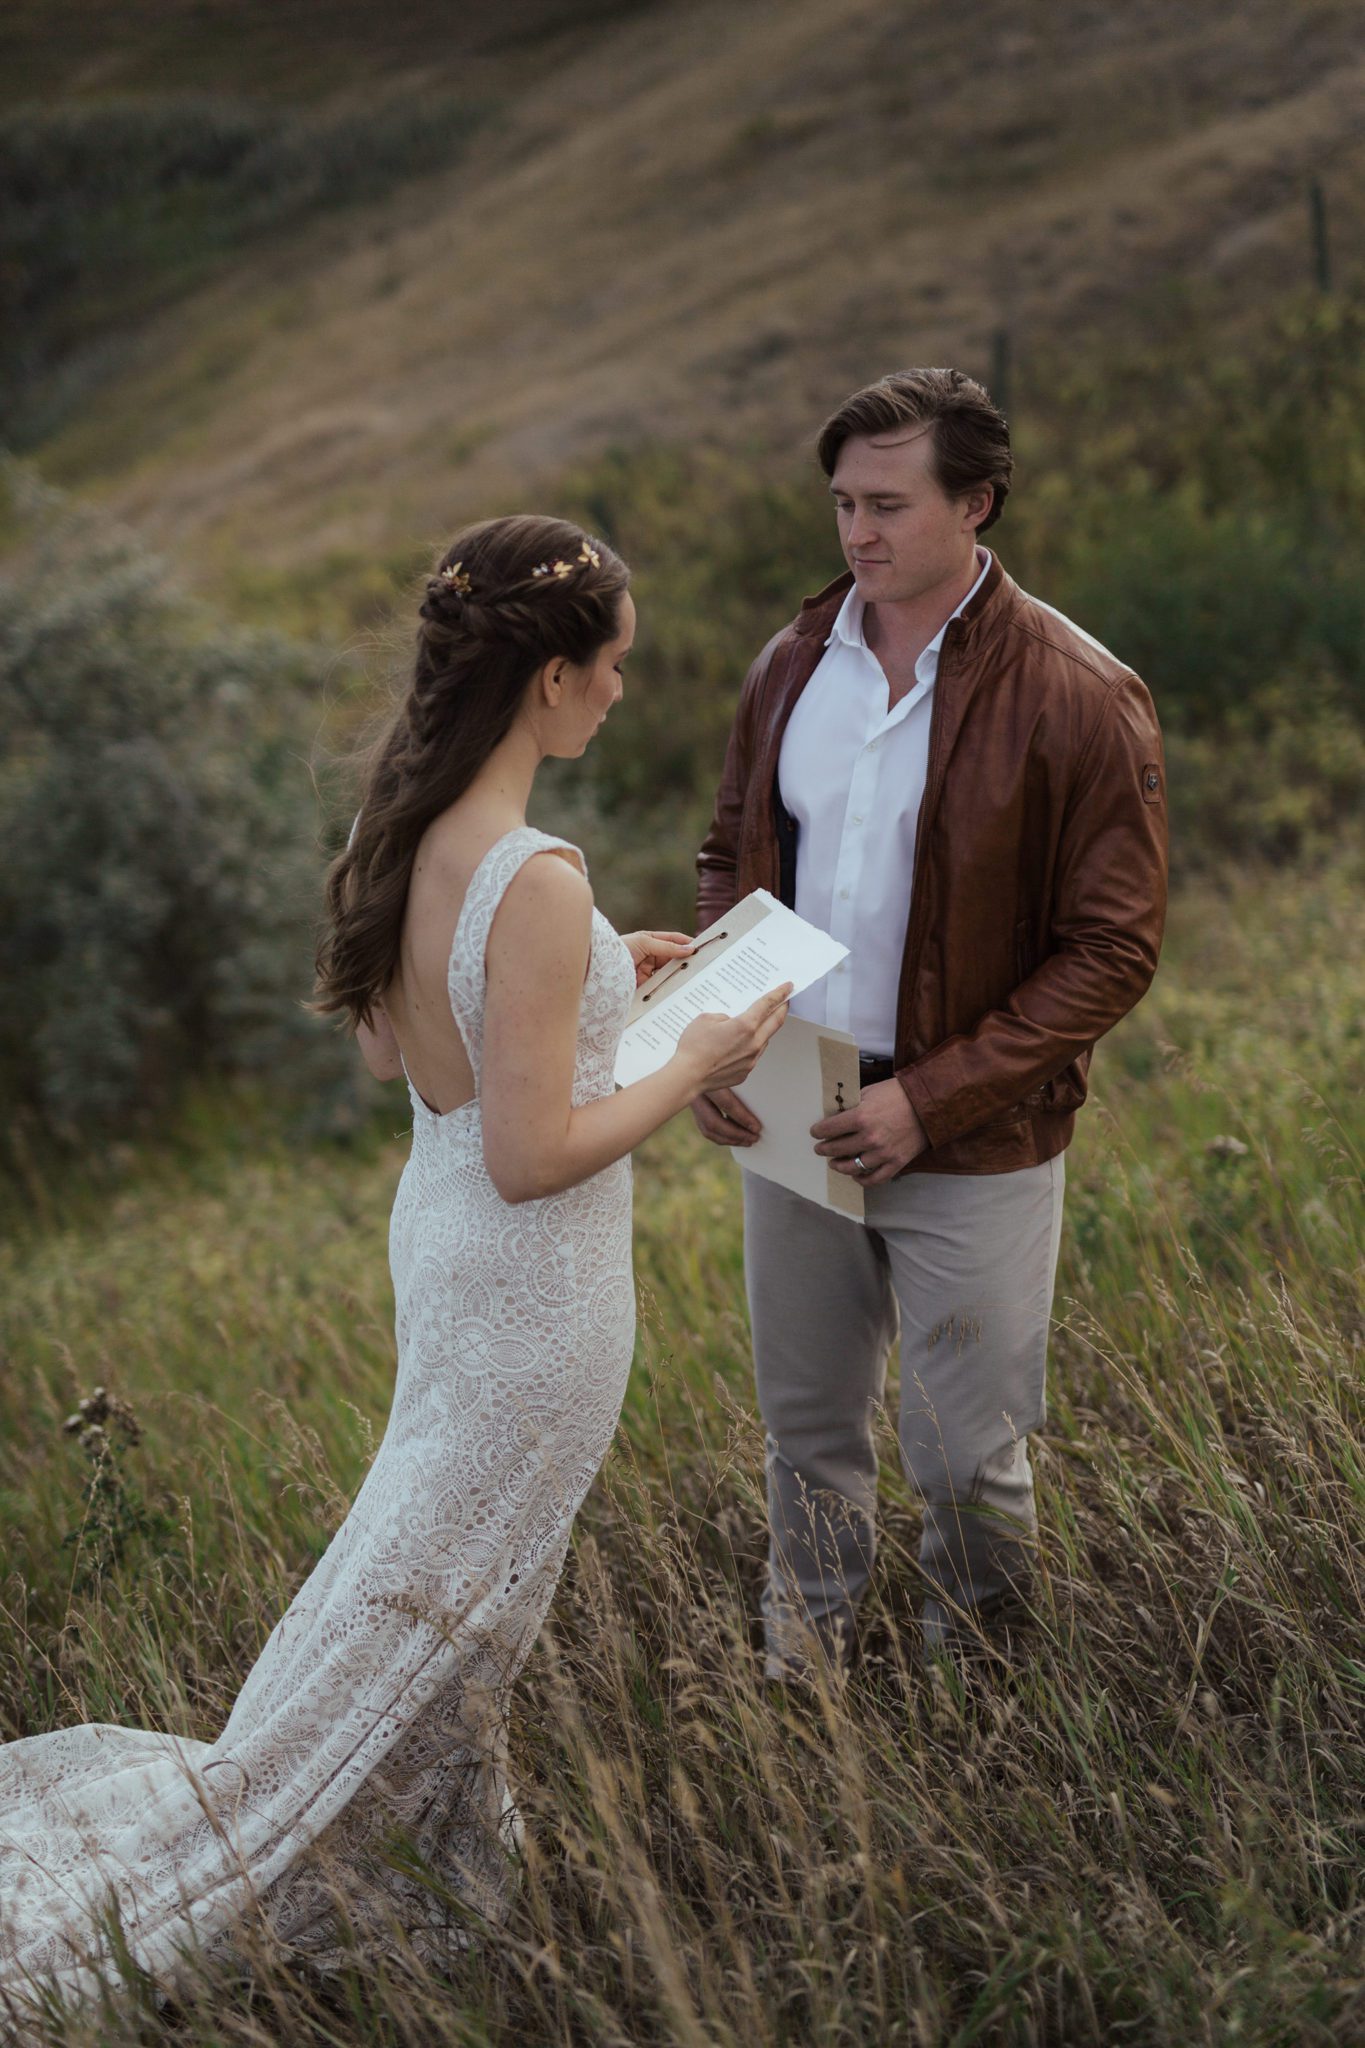 Bride and groom at their intimate vow renewal, reading their vows to each other with Alberta rural countryside as the backdrop, fall vow renewal inspiration. 